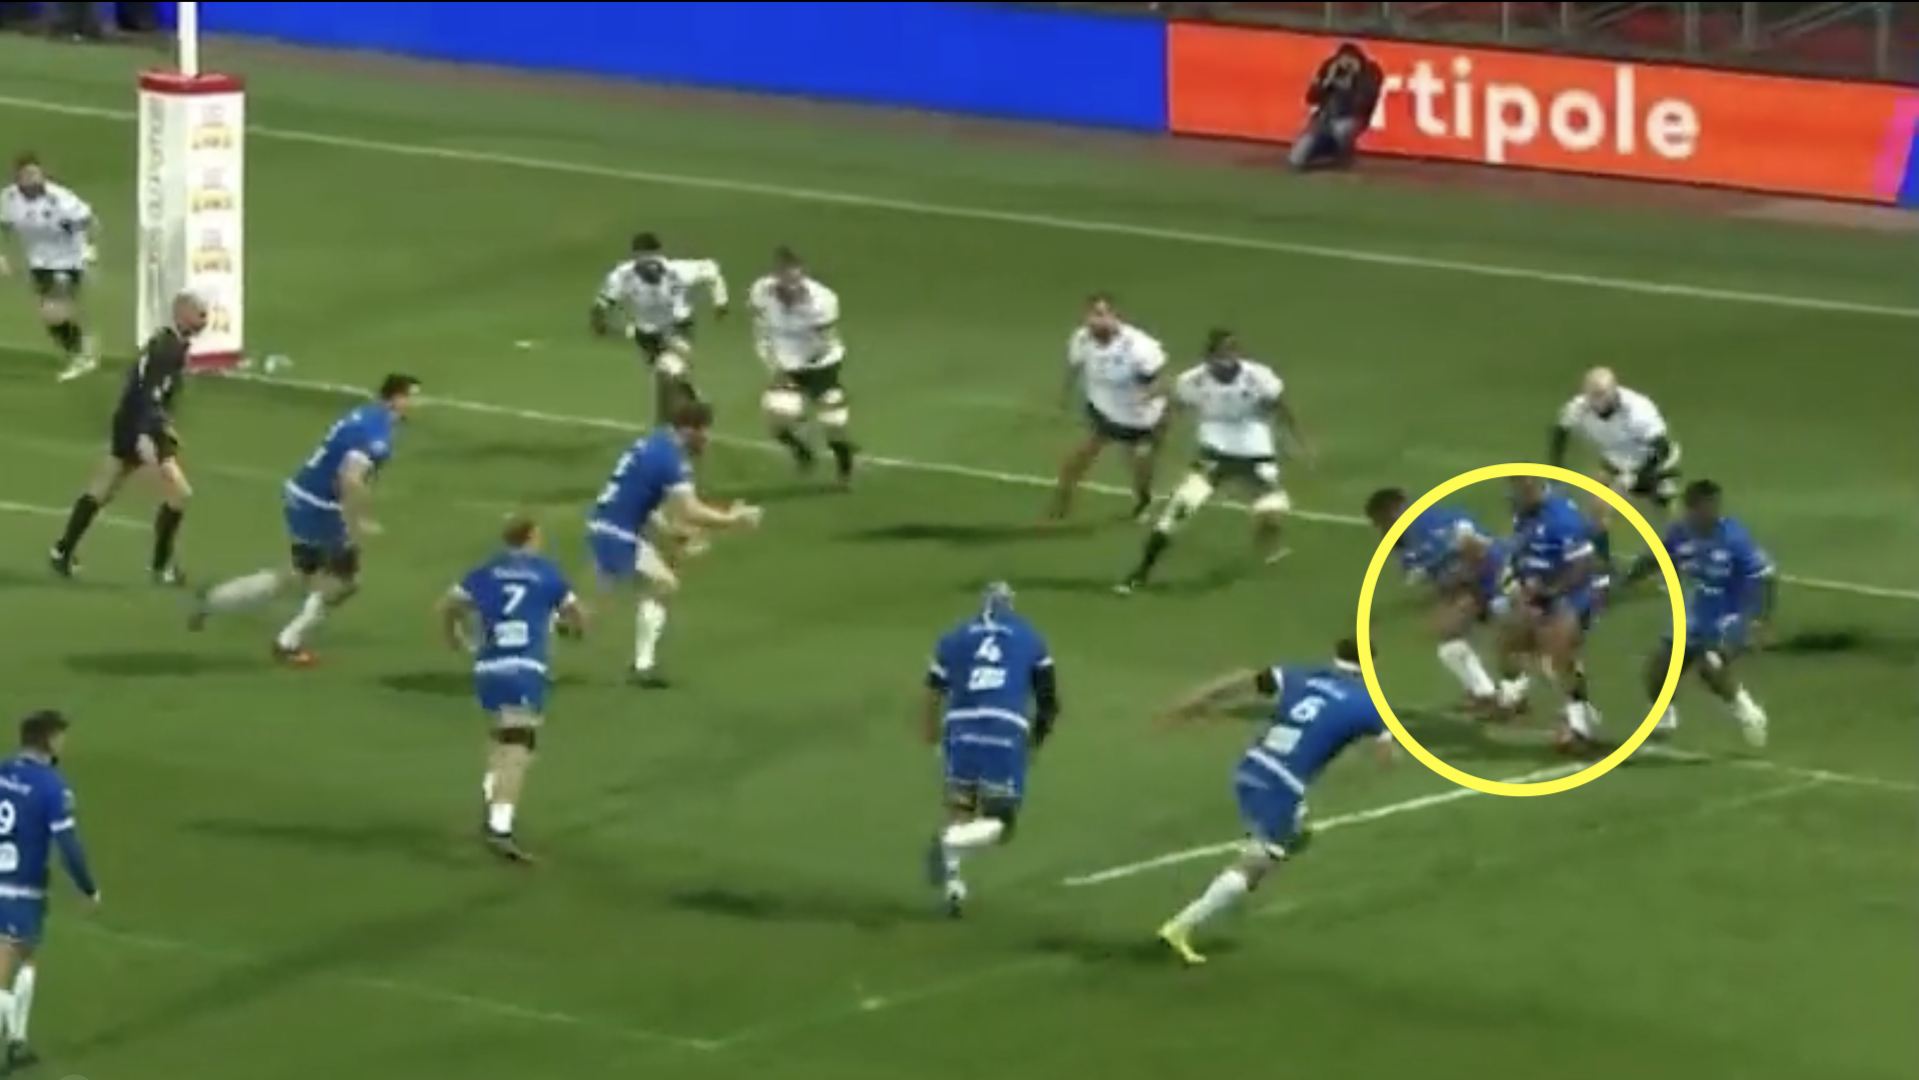 Genius five metre tap move bamboozles eight players at once